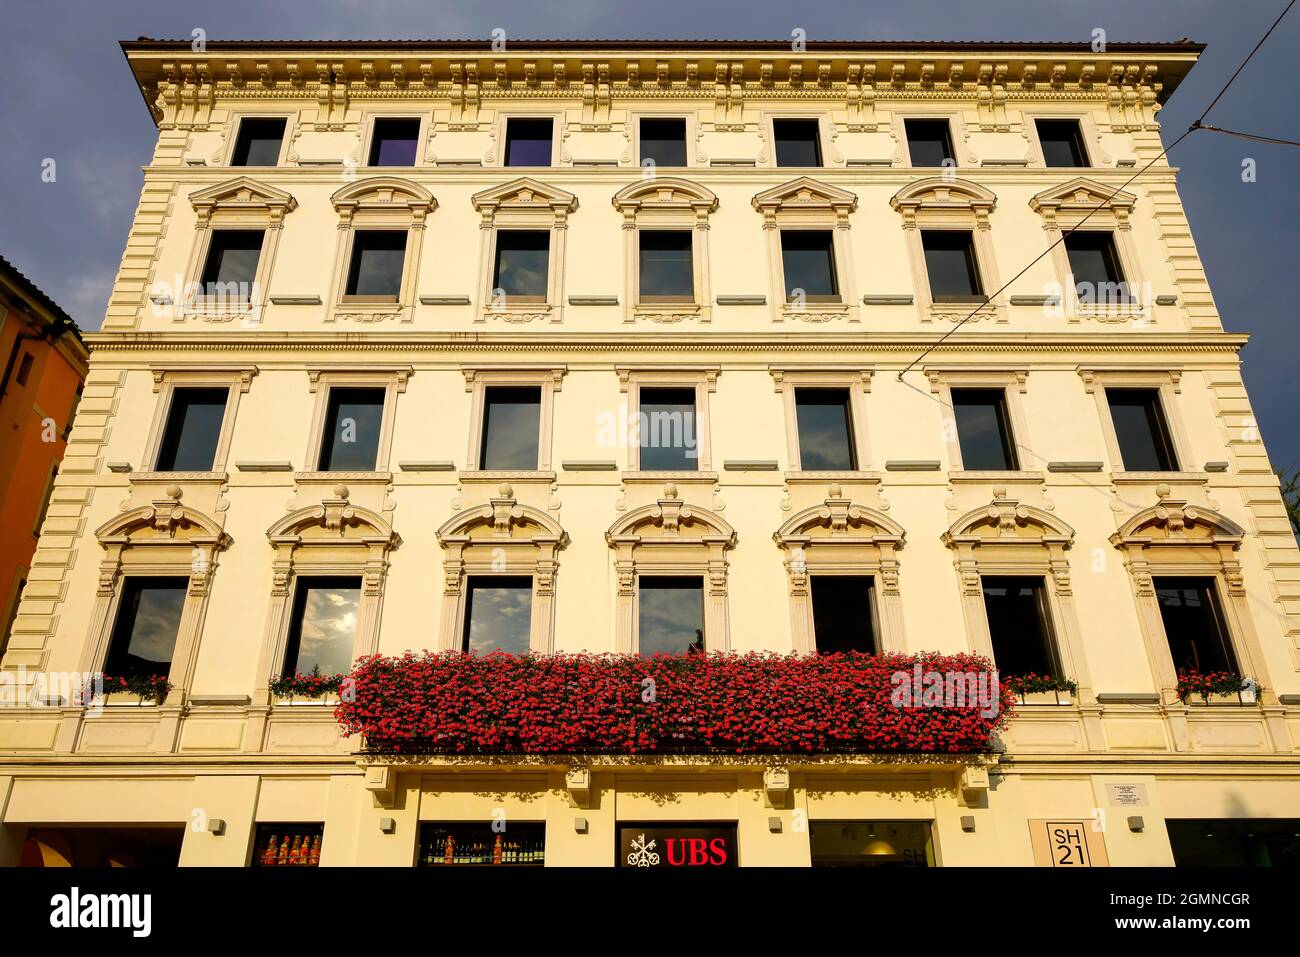 UBS SA building by Piazza Riforma in Lugano, Canton of Ticino. Switzerland  Stock Photo - Alamy